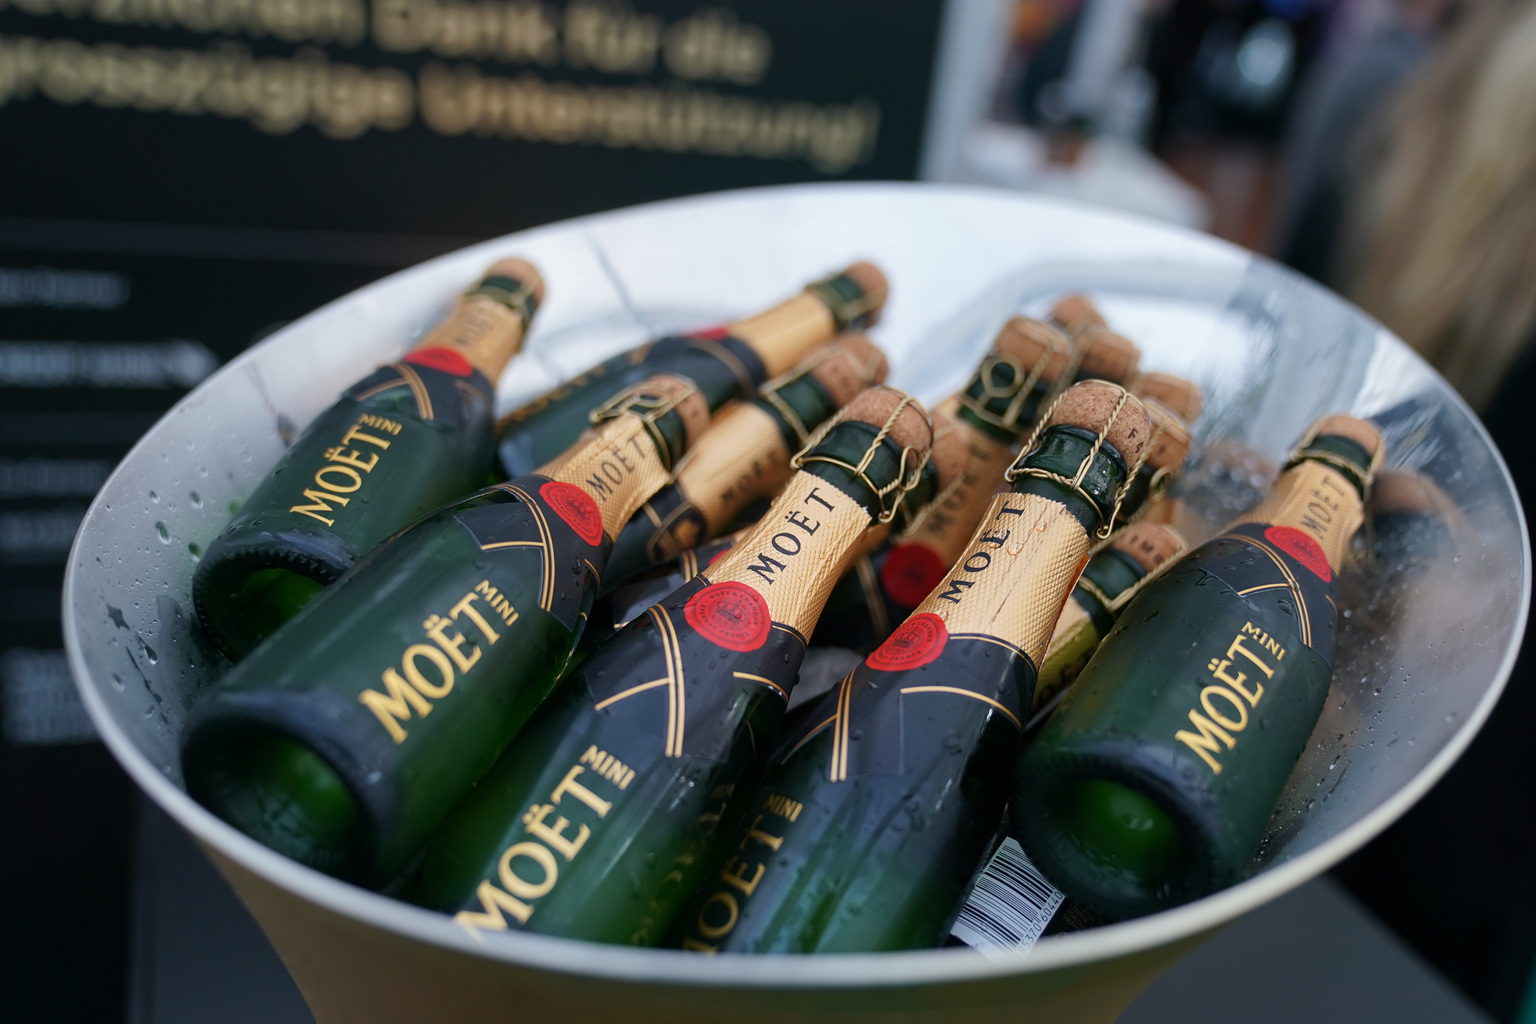 LVMH denies MoÃ«t Hennessy sale reports